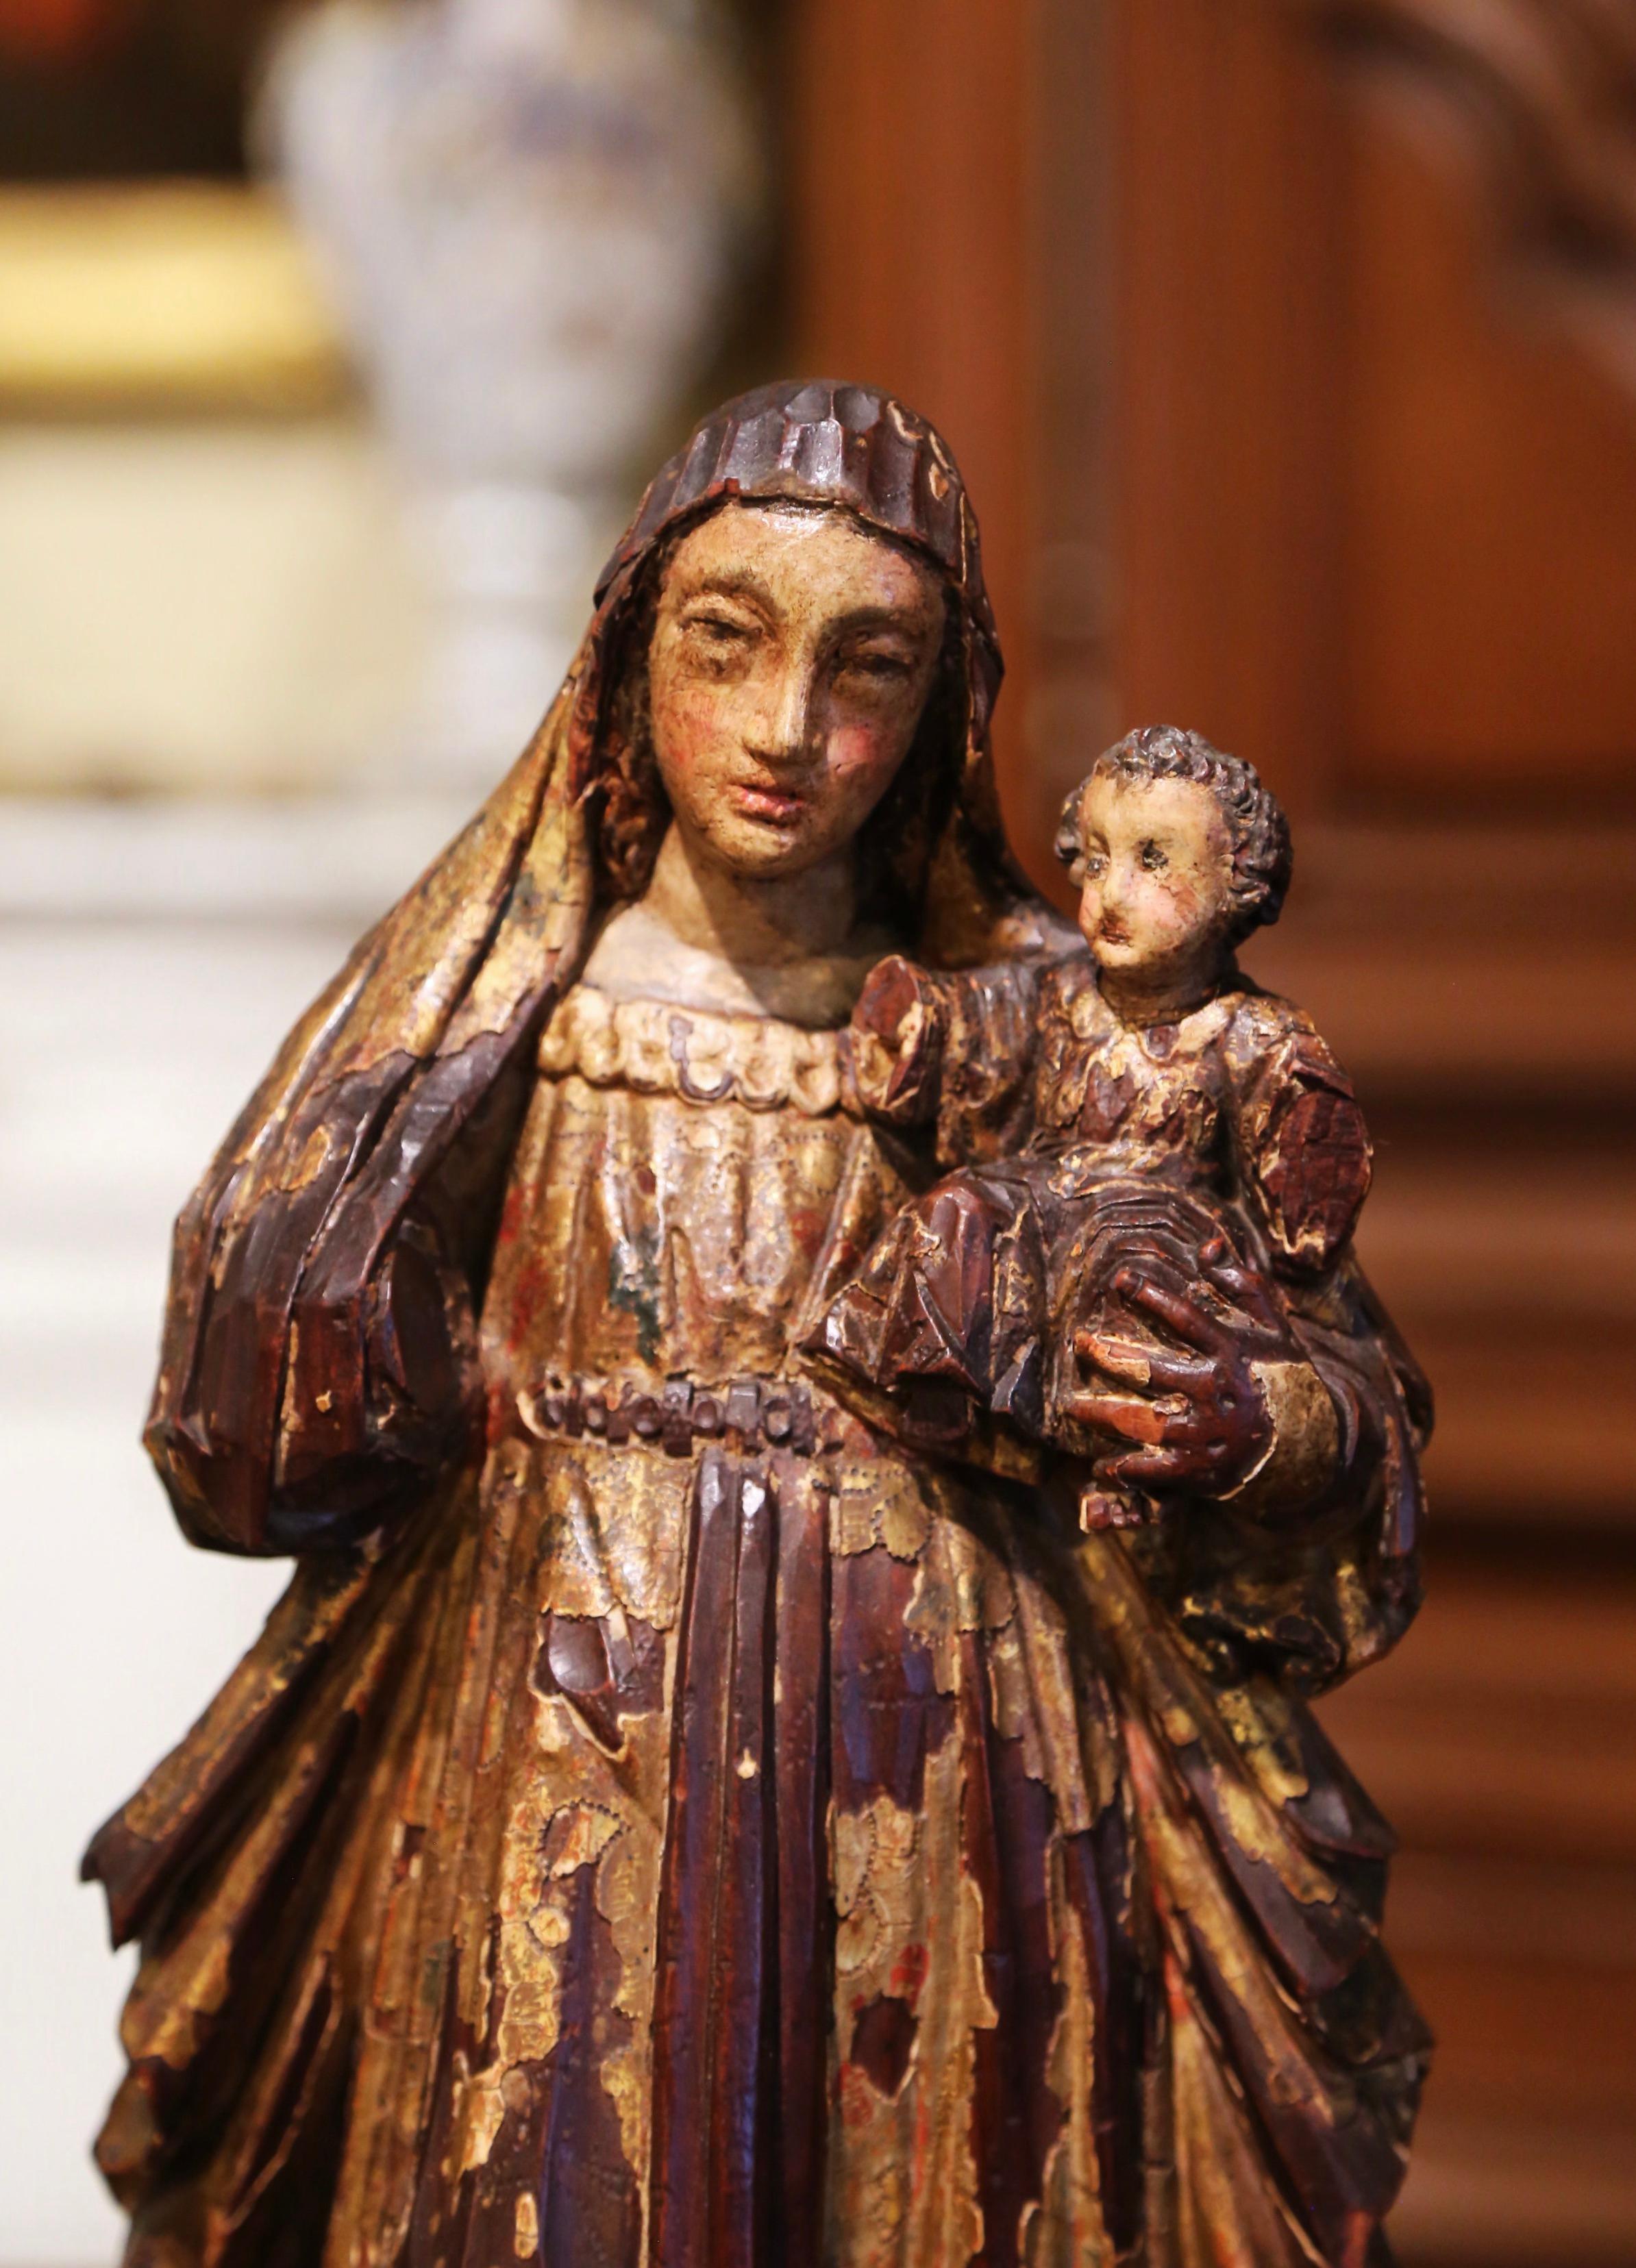 This antique religious figure was carved in Spain, circa 1760. The large alluring polychrome and gilt sculpture in high relief, depicts the Virgin Mary standing and carrying little Jesus in her left arm. The colonial santo figure has wonderful